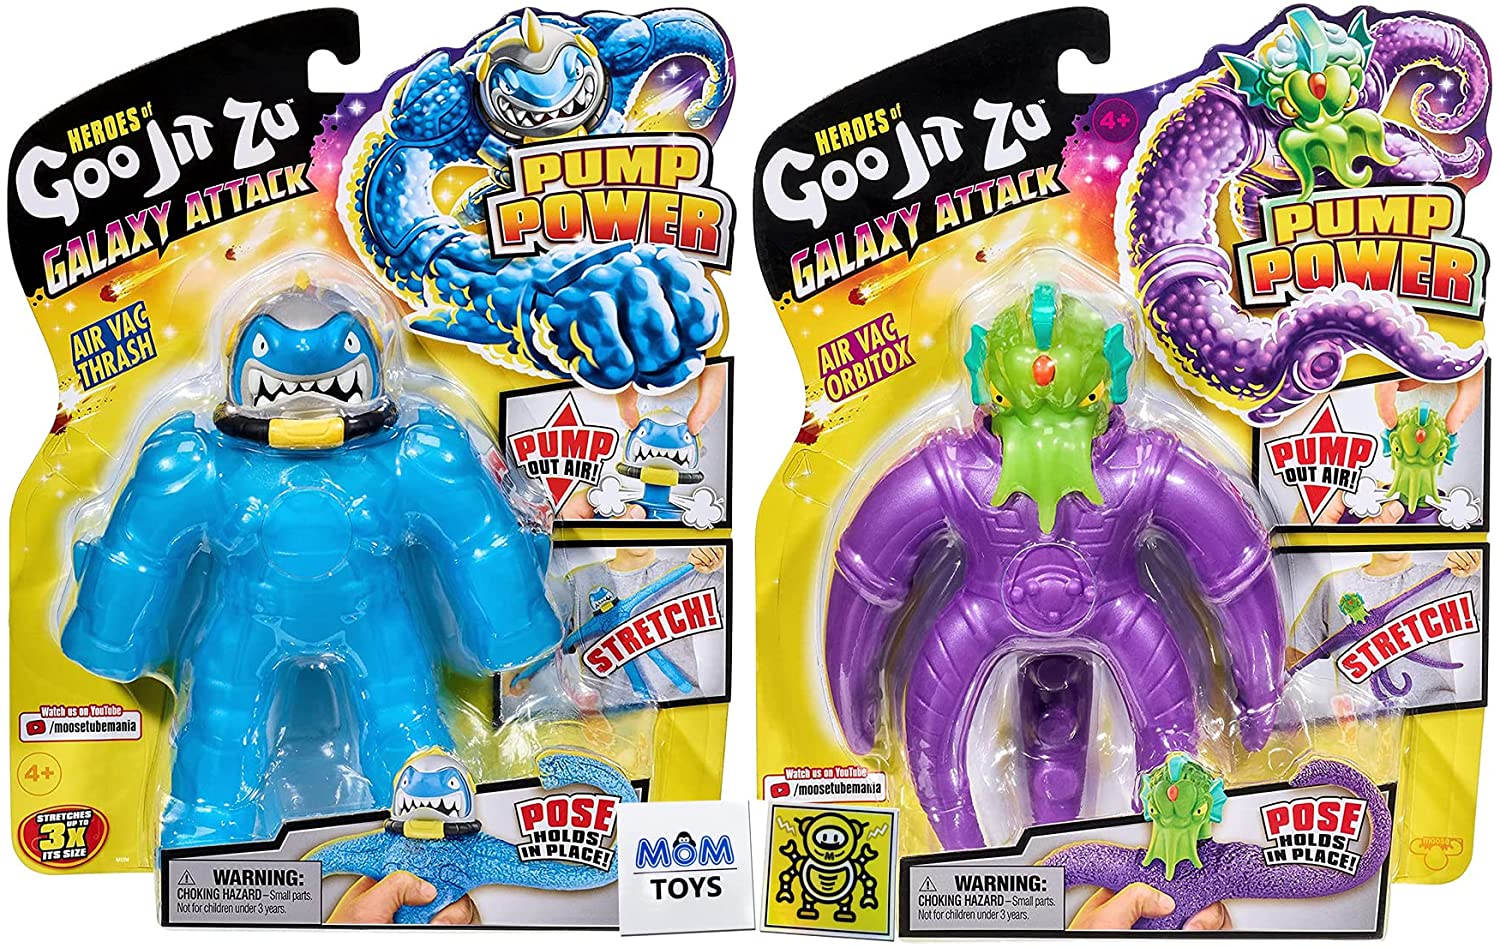 Heroes of Goo JIT Zu Air Vac Thrash and Orbitox Space Aliens Action Figure 2 Pack Toy Bundle with 2 My Outlet Mall Stickers